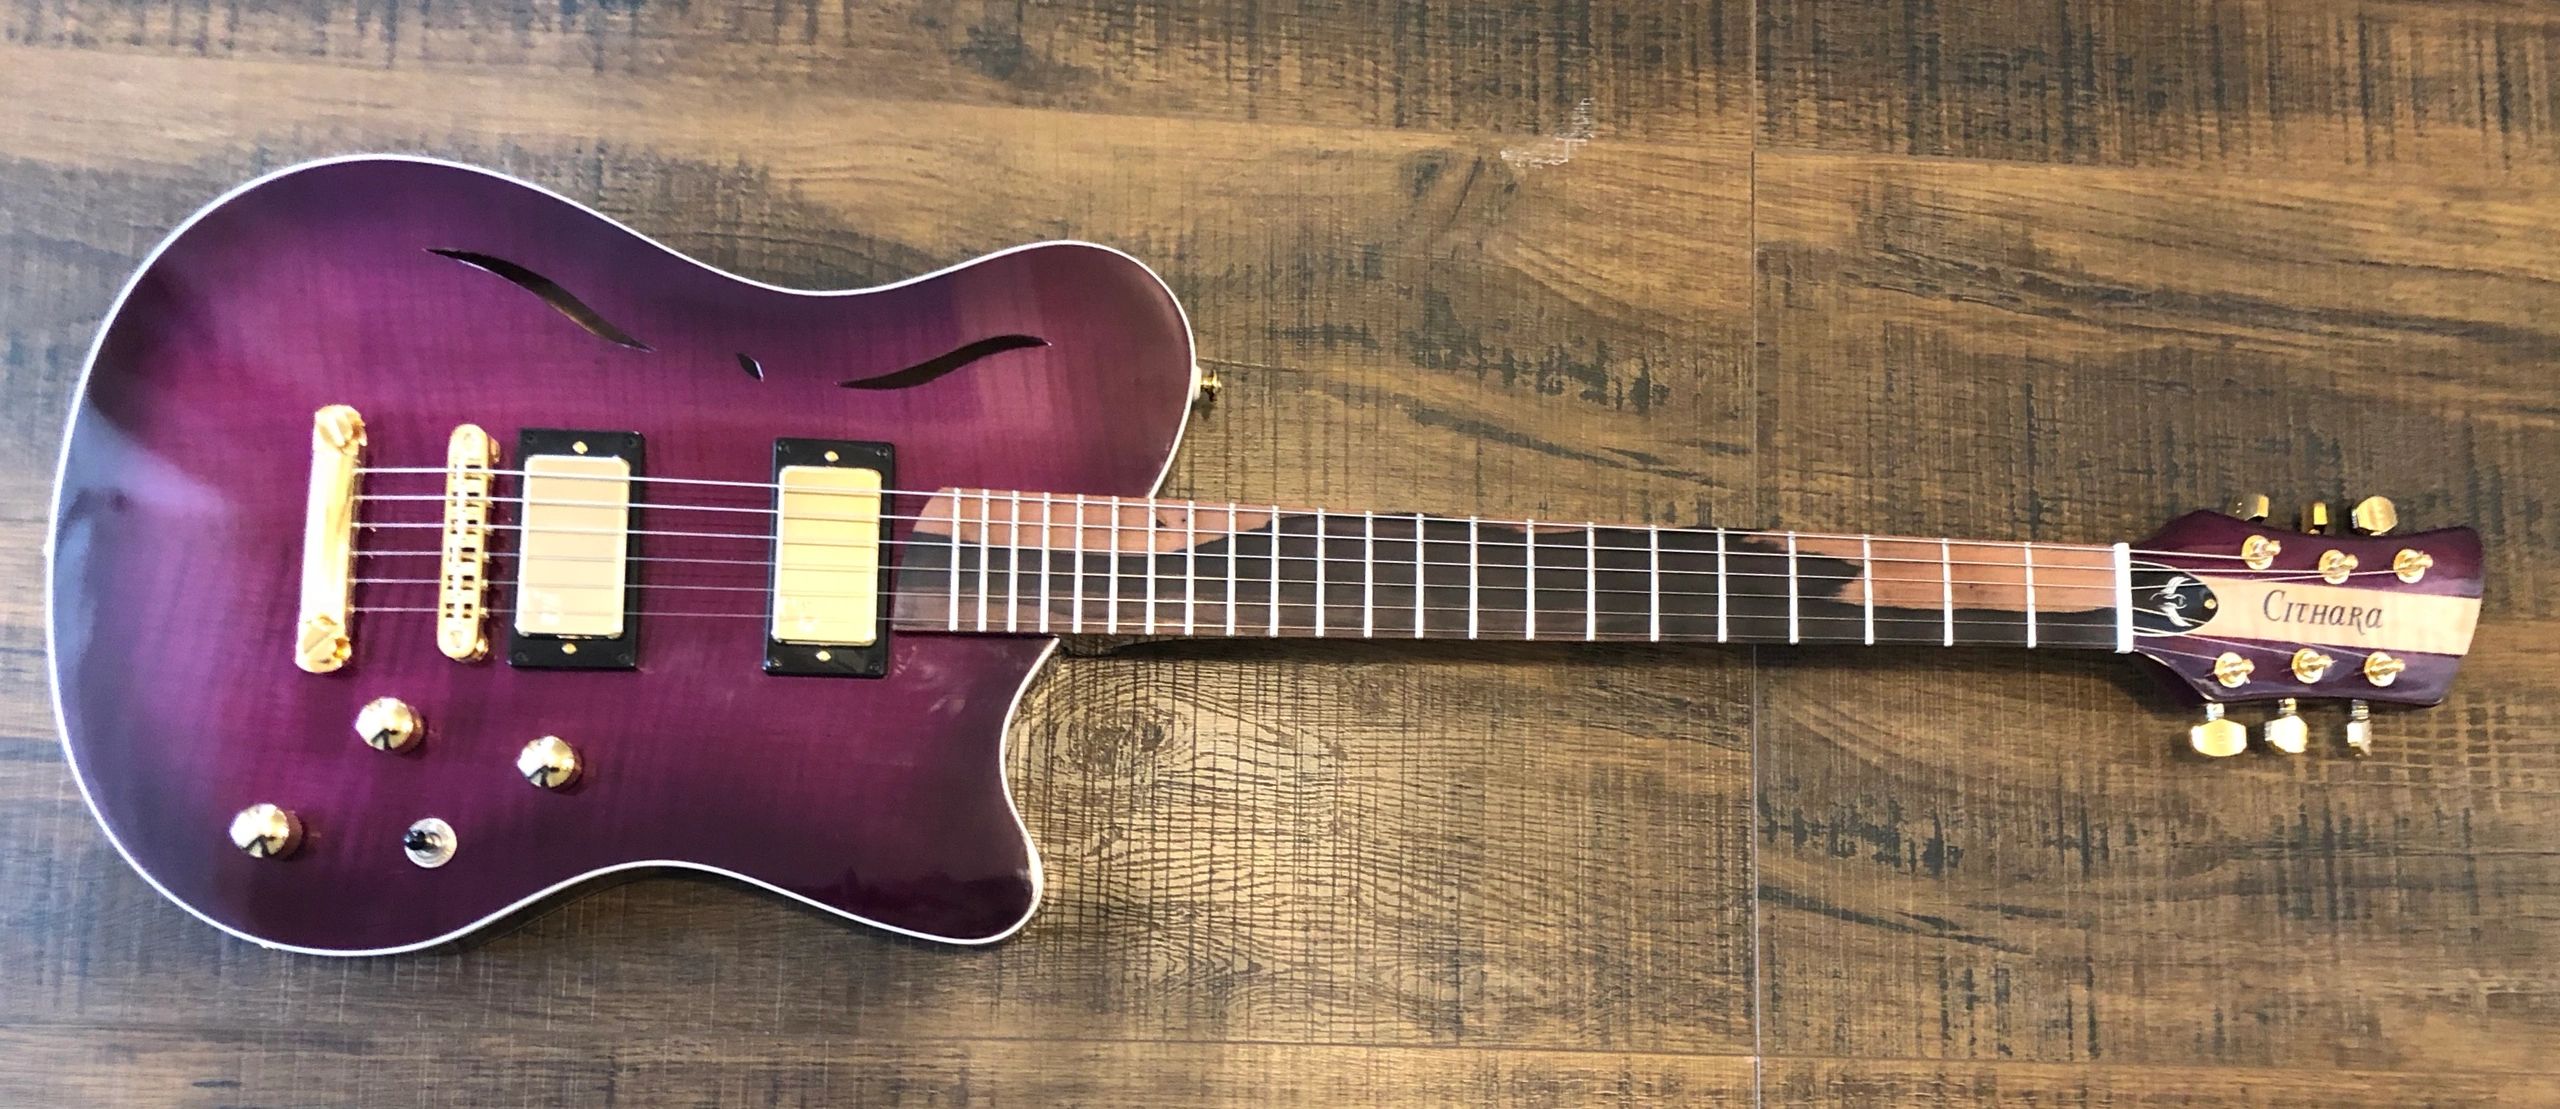 Cithara Guitars' Aphrodite electric guitar with a maple hollow-body and curly maple top.